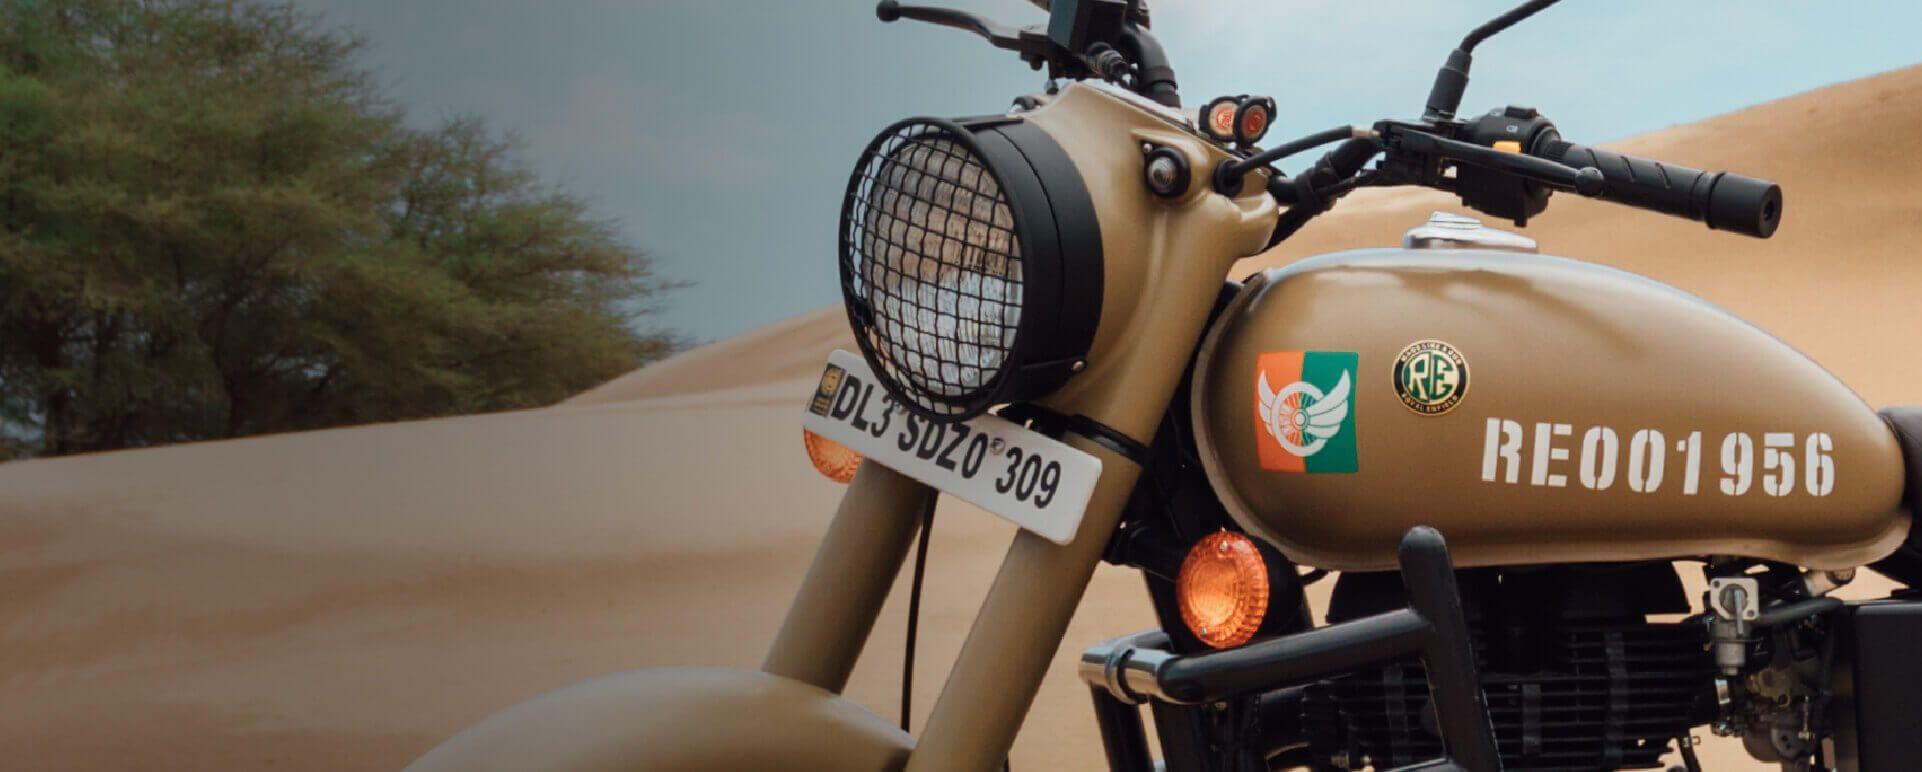 ROYAL ENFIELD CLASSIC 350 SIGNALS Photo, Image and Wallpaper